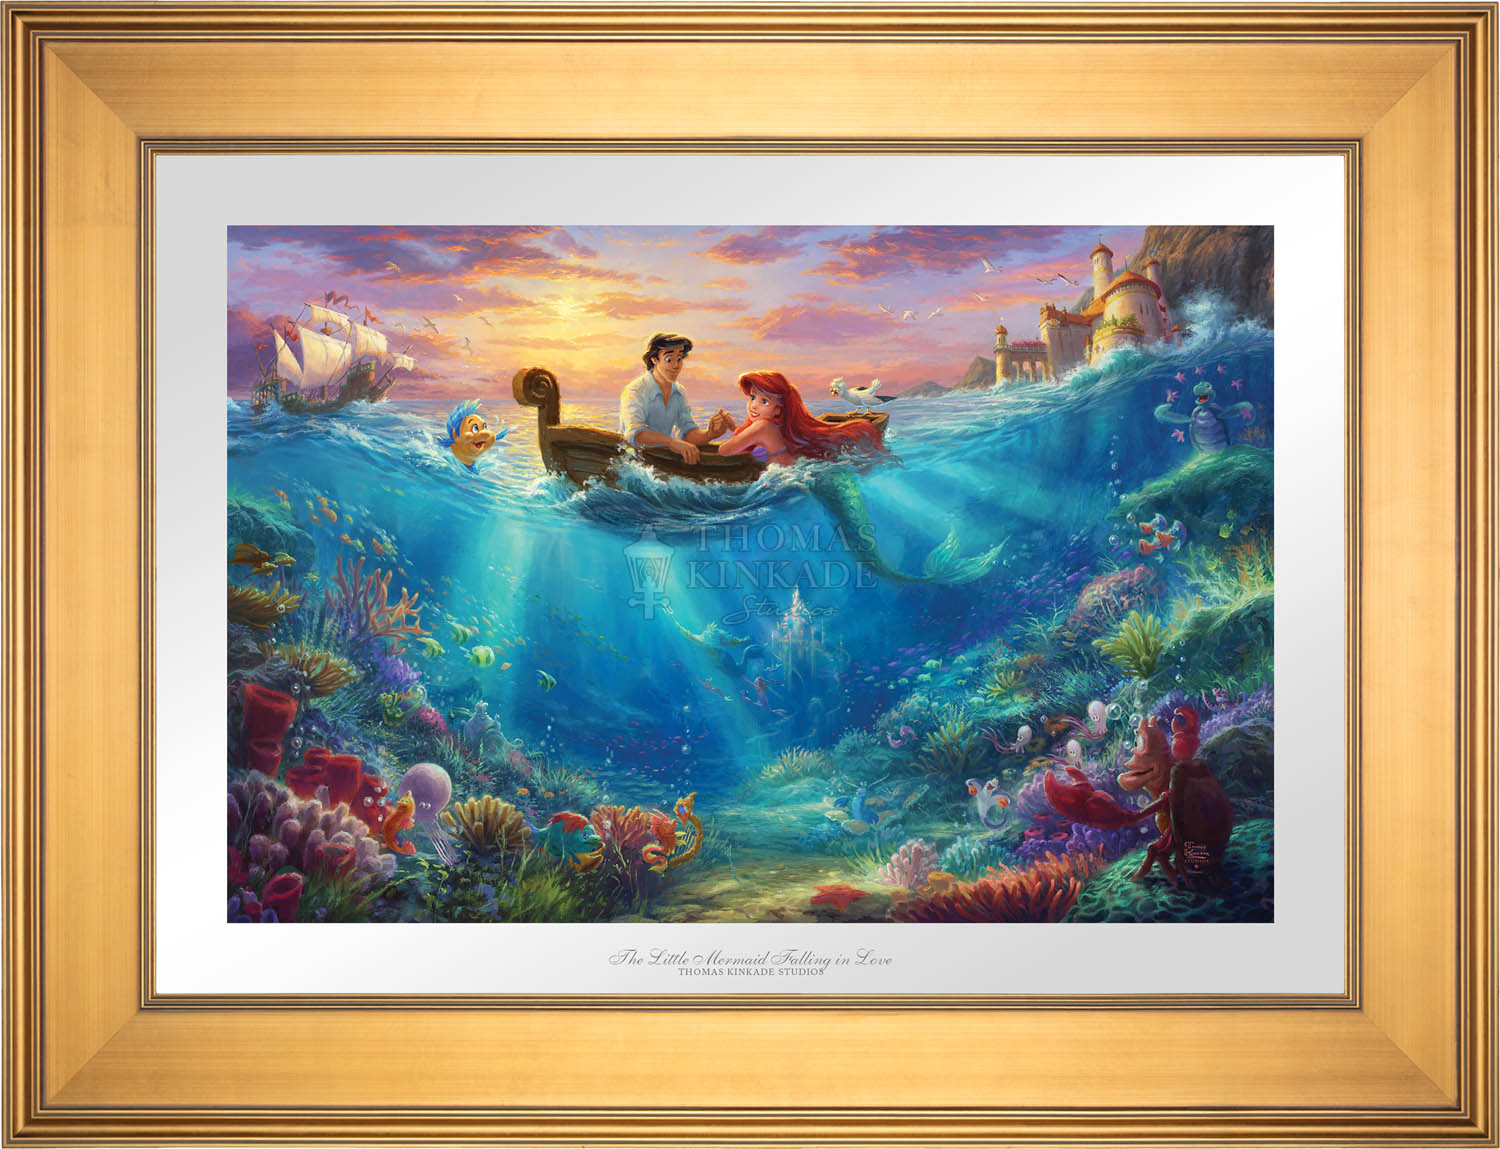  Prince Eric comes out to meet Ariel on a small rowboat, as all the sea creatures look on - Gallery Gold Frame.